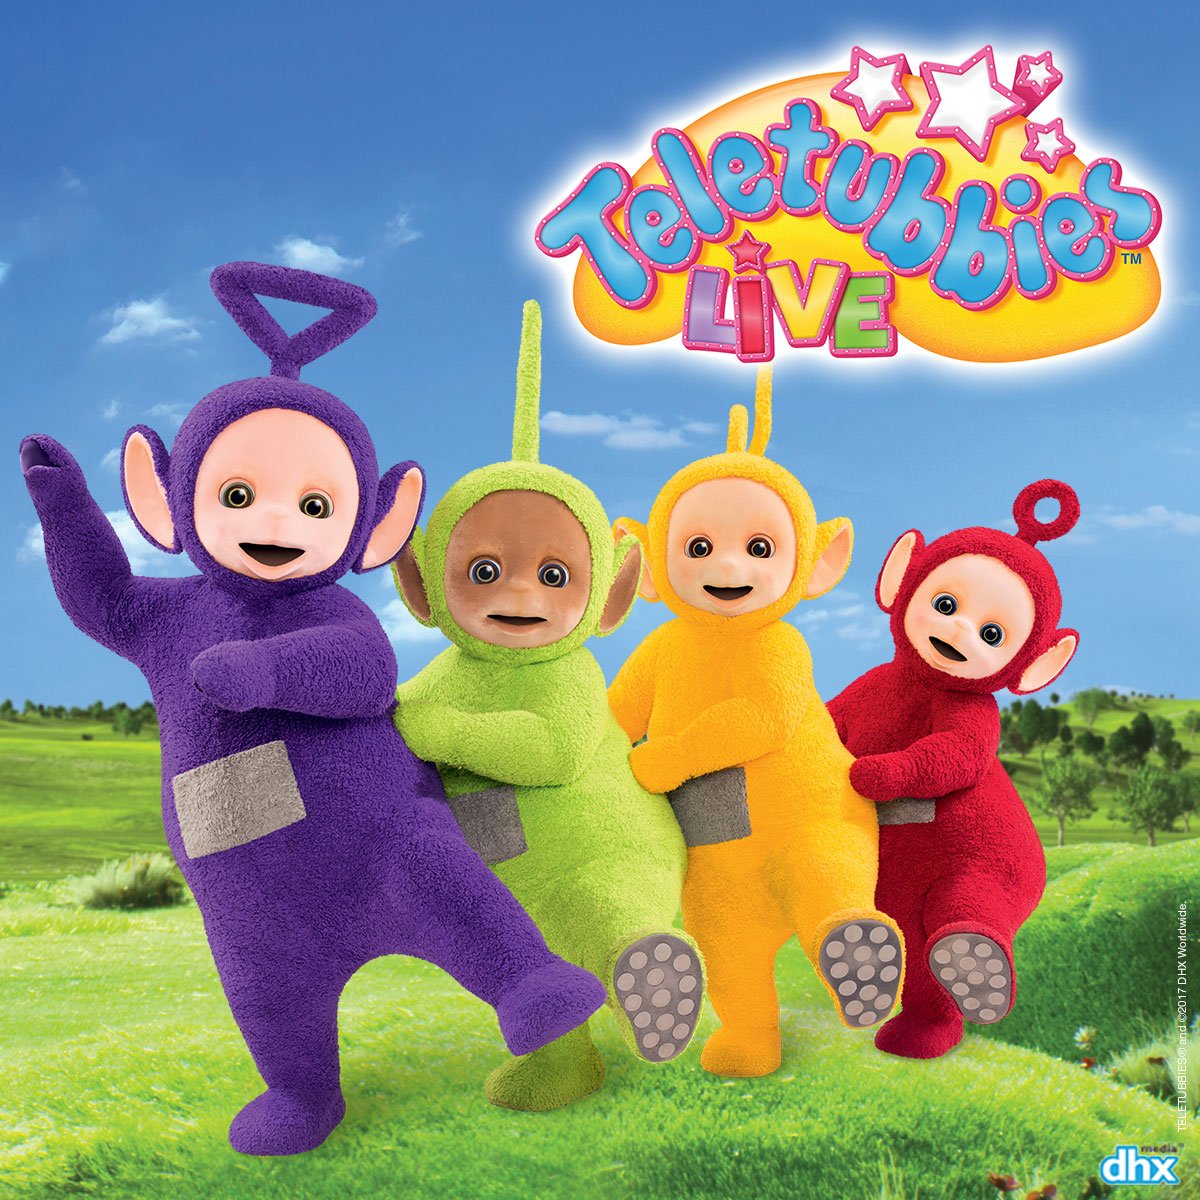 Teletubbies say Eh-Oh! 